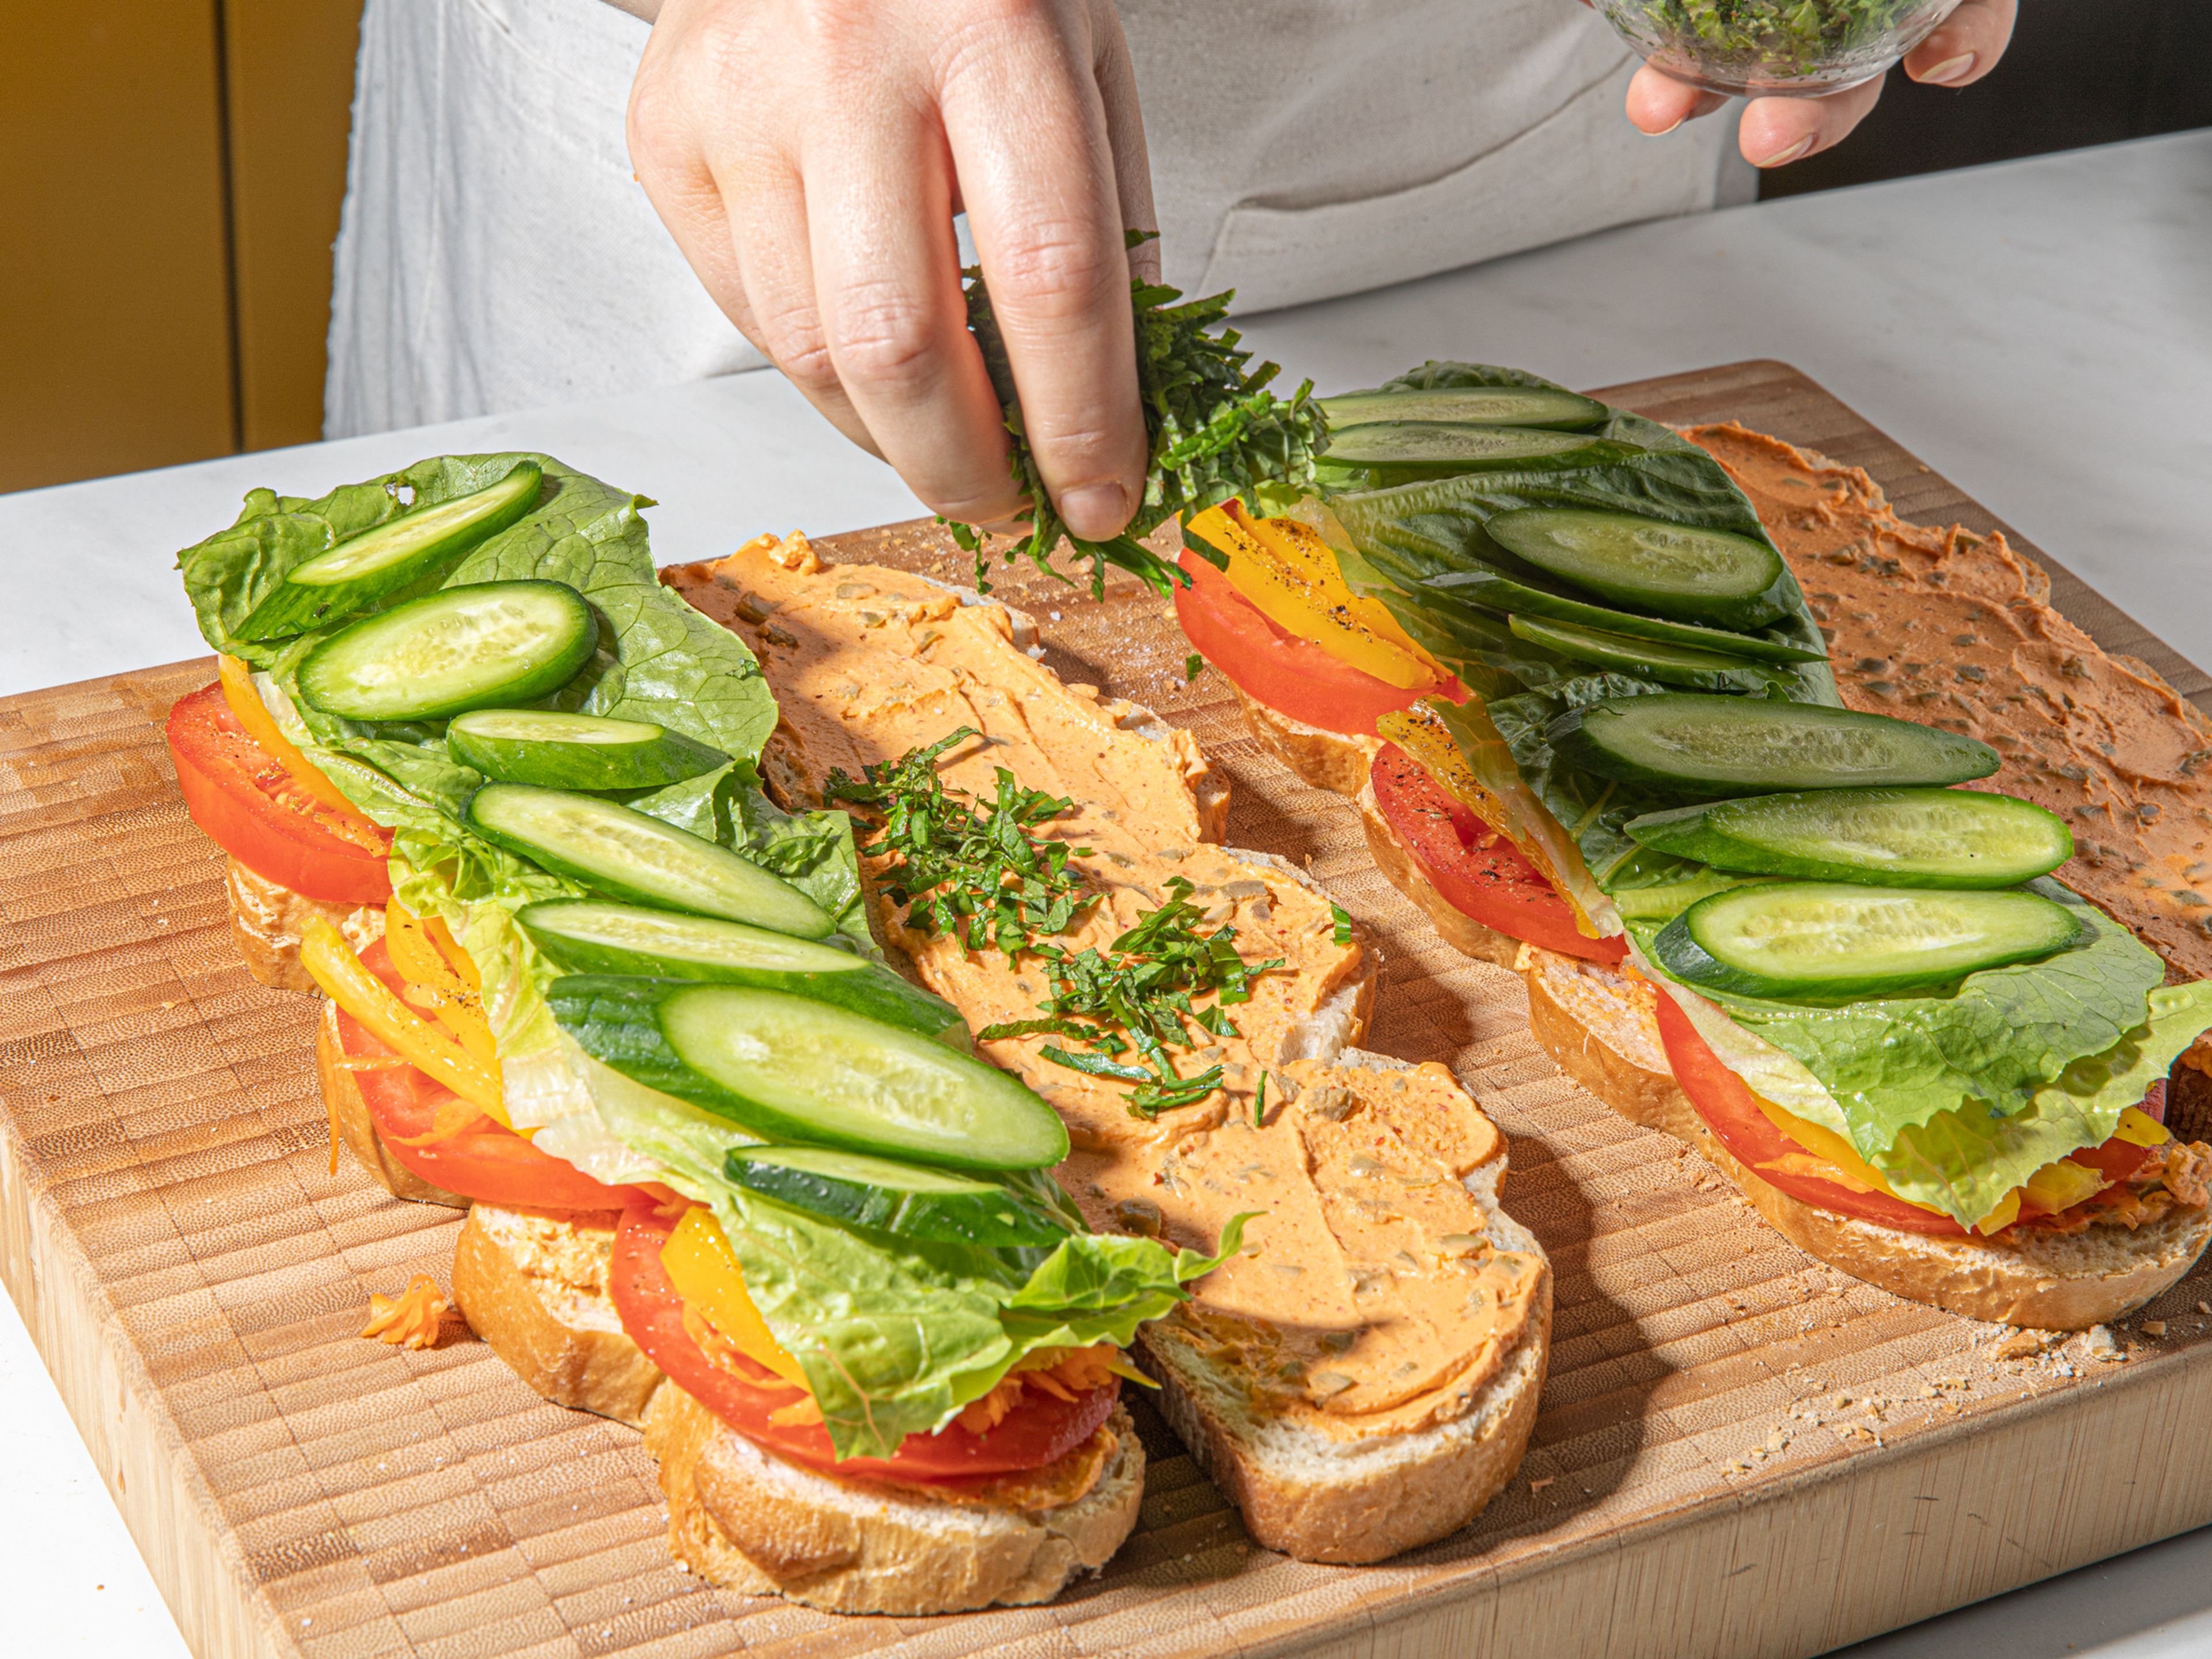 To assemble the sandwiches, spread cream cheese evenly over one side of each piece of bread. Stack the tomato, salt, pepper, lettuce, bell pepper, cucumber, herbs, and carrots, then cover with the extra slices of bread, cream cheese side down. Press well with your hands to squish the sandwich together a bit, then slice if desired and serve. Enjoy!